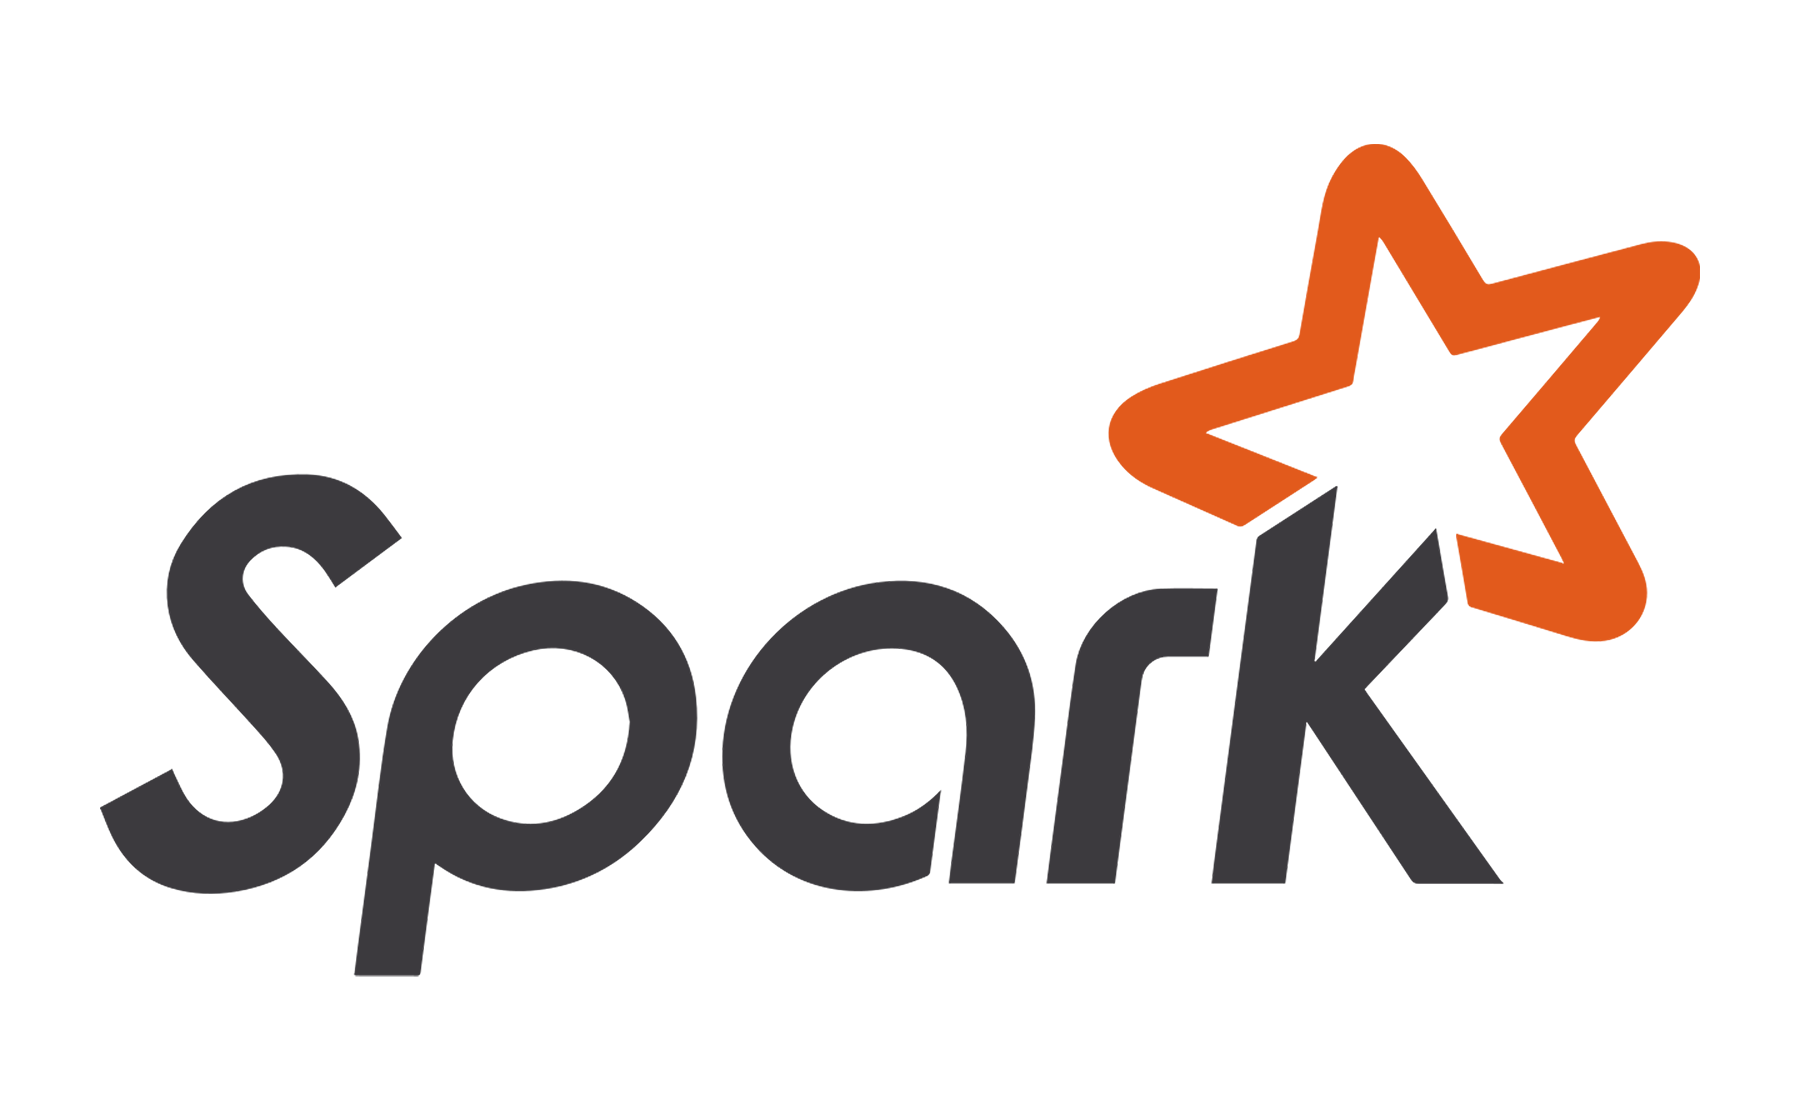 Pivoting data with Spark